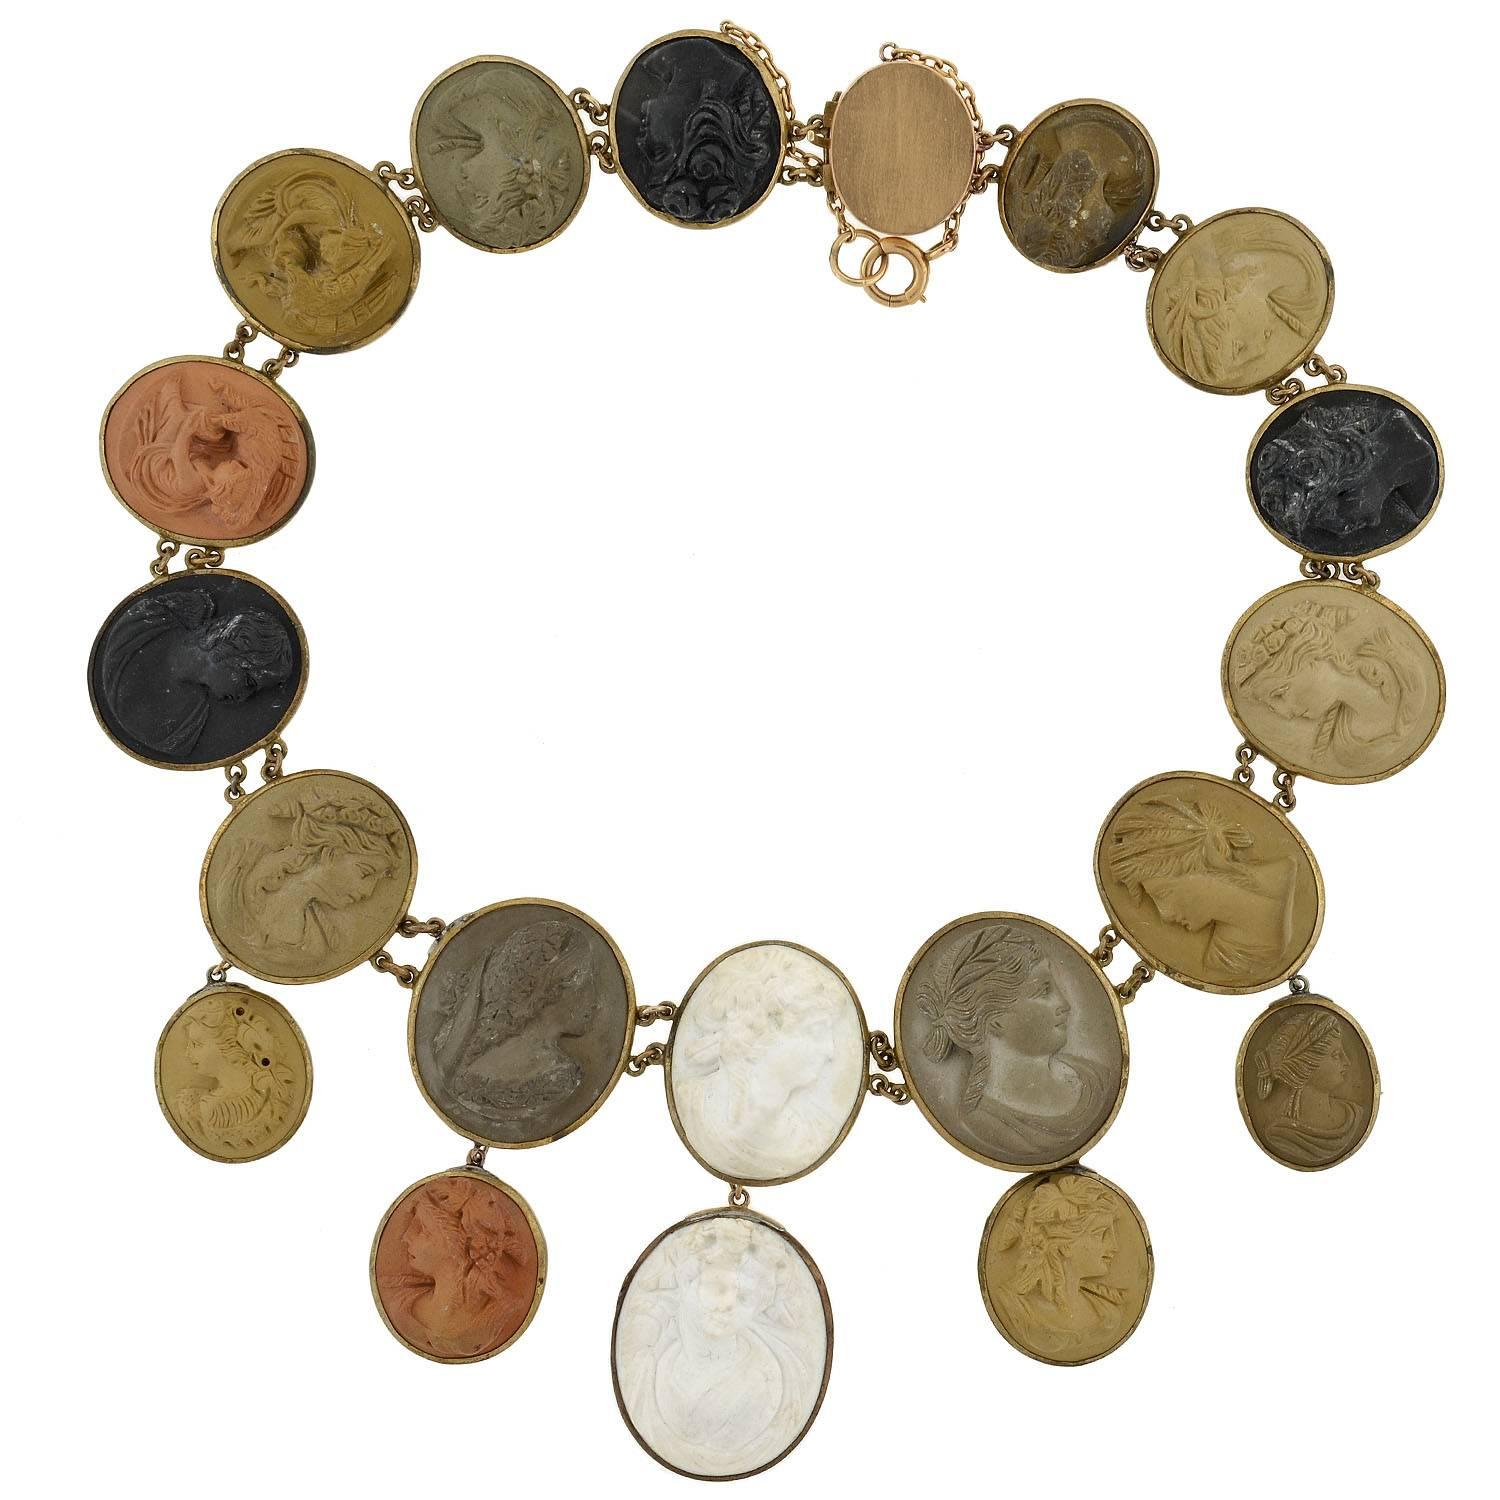 A simply exquisite lava cameo necklace from the Victorian (ca1880) era! This extravagant piece is comprised of 19 large cameos, all made from different colors of lava. The cameos graduate in size, getting larger towards the center and hanging from